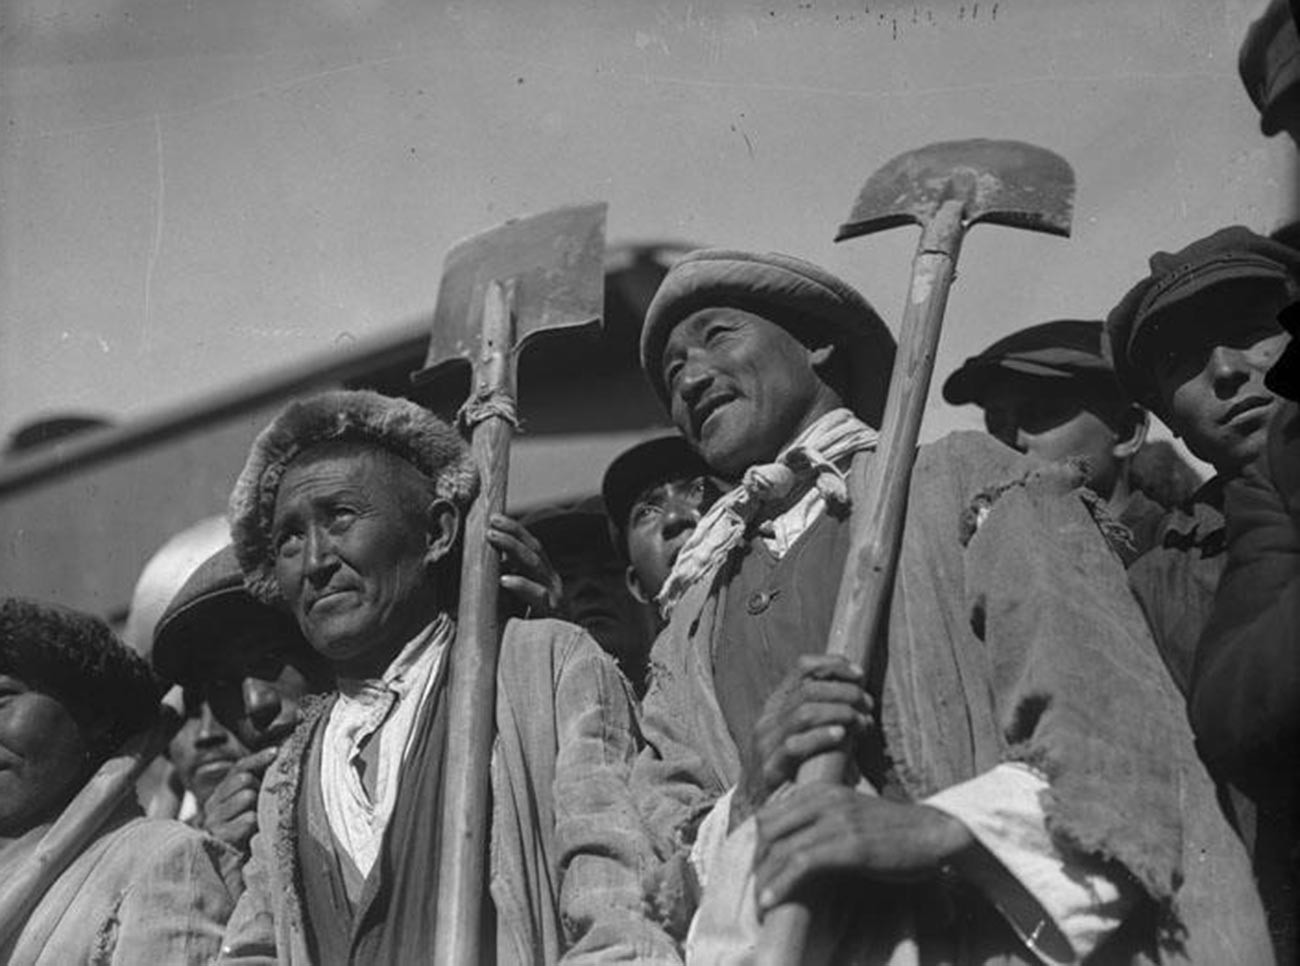  Kazakh builders of TURKSIB, one of the main construction projects of the first five-year plan of Stalin's industrialization. The railway connected Siberia with Kazakh and Kyrgyz republics; 1930.